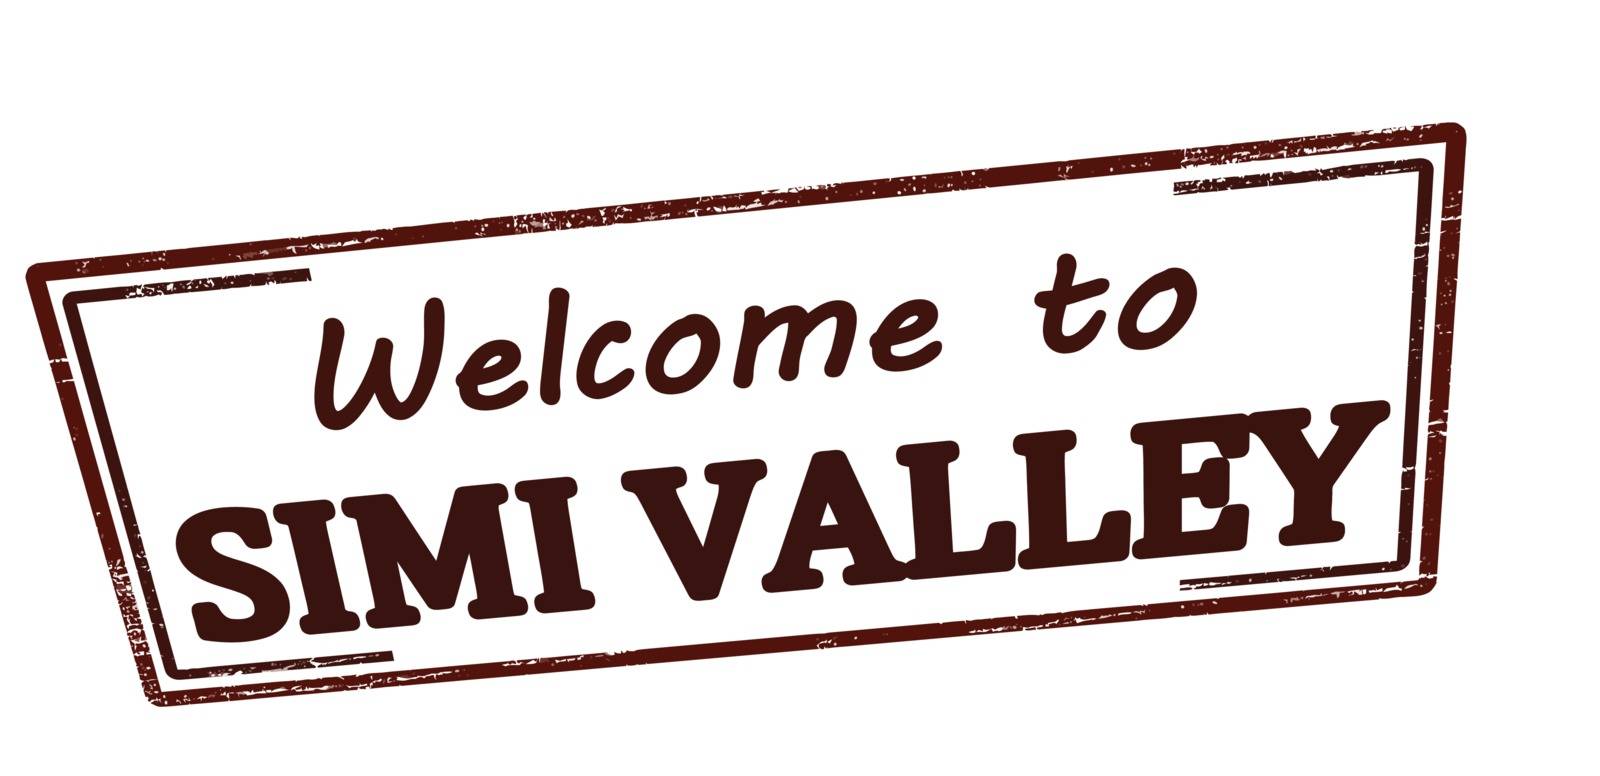 Welcome to Simi Vlley by carmenbobo